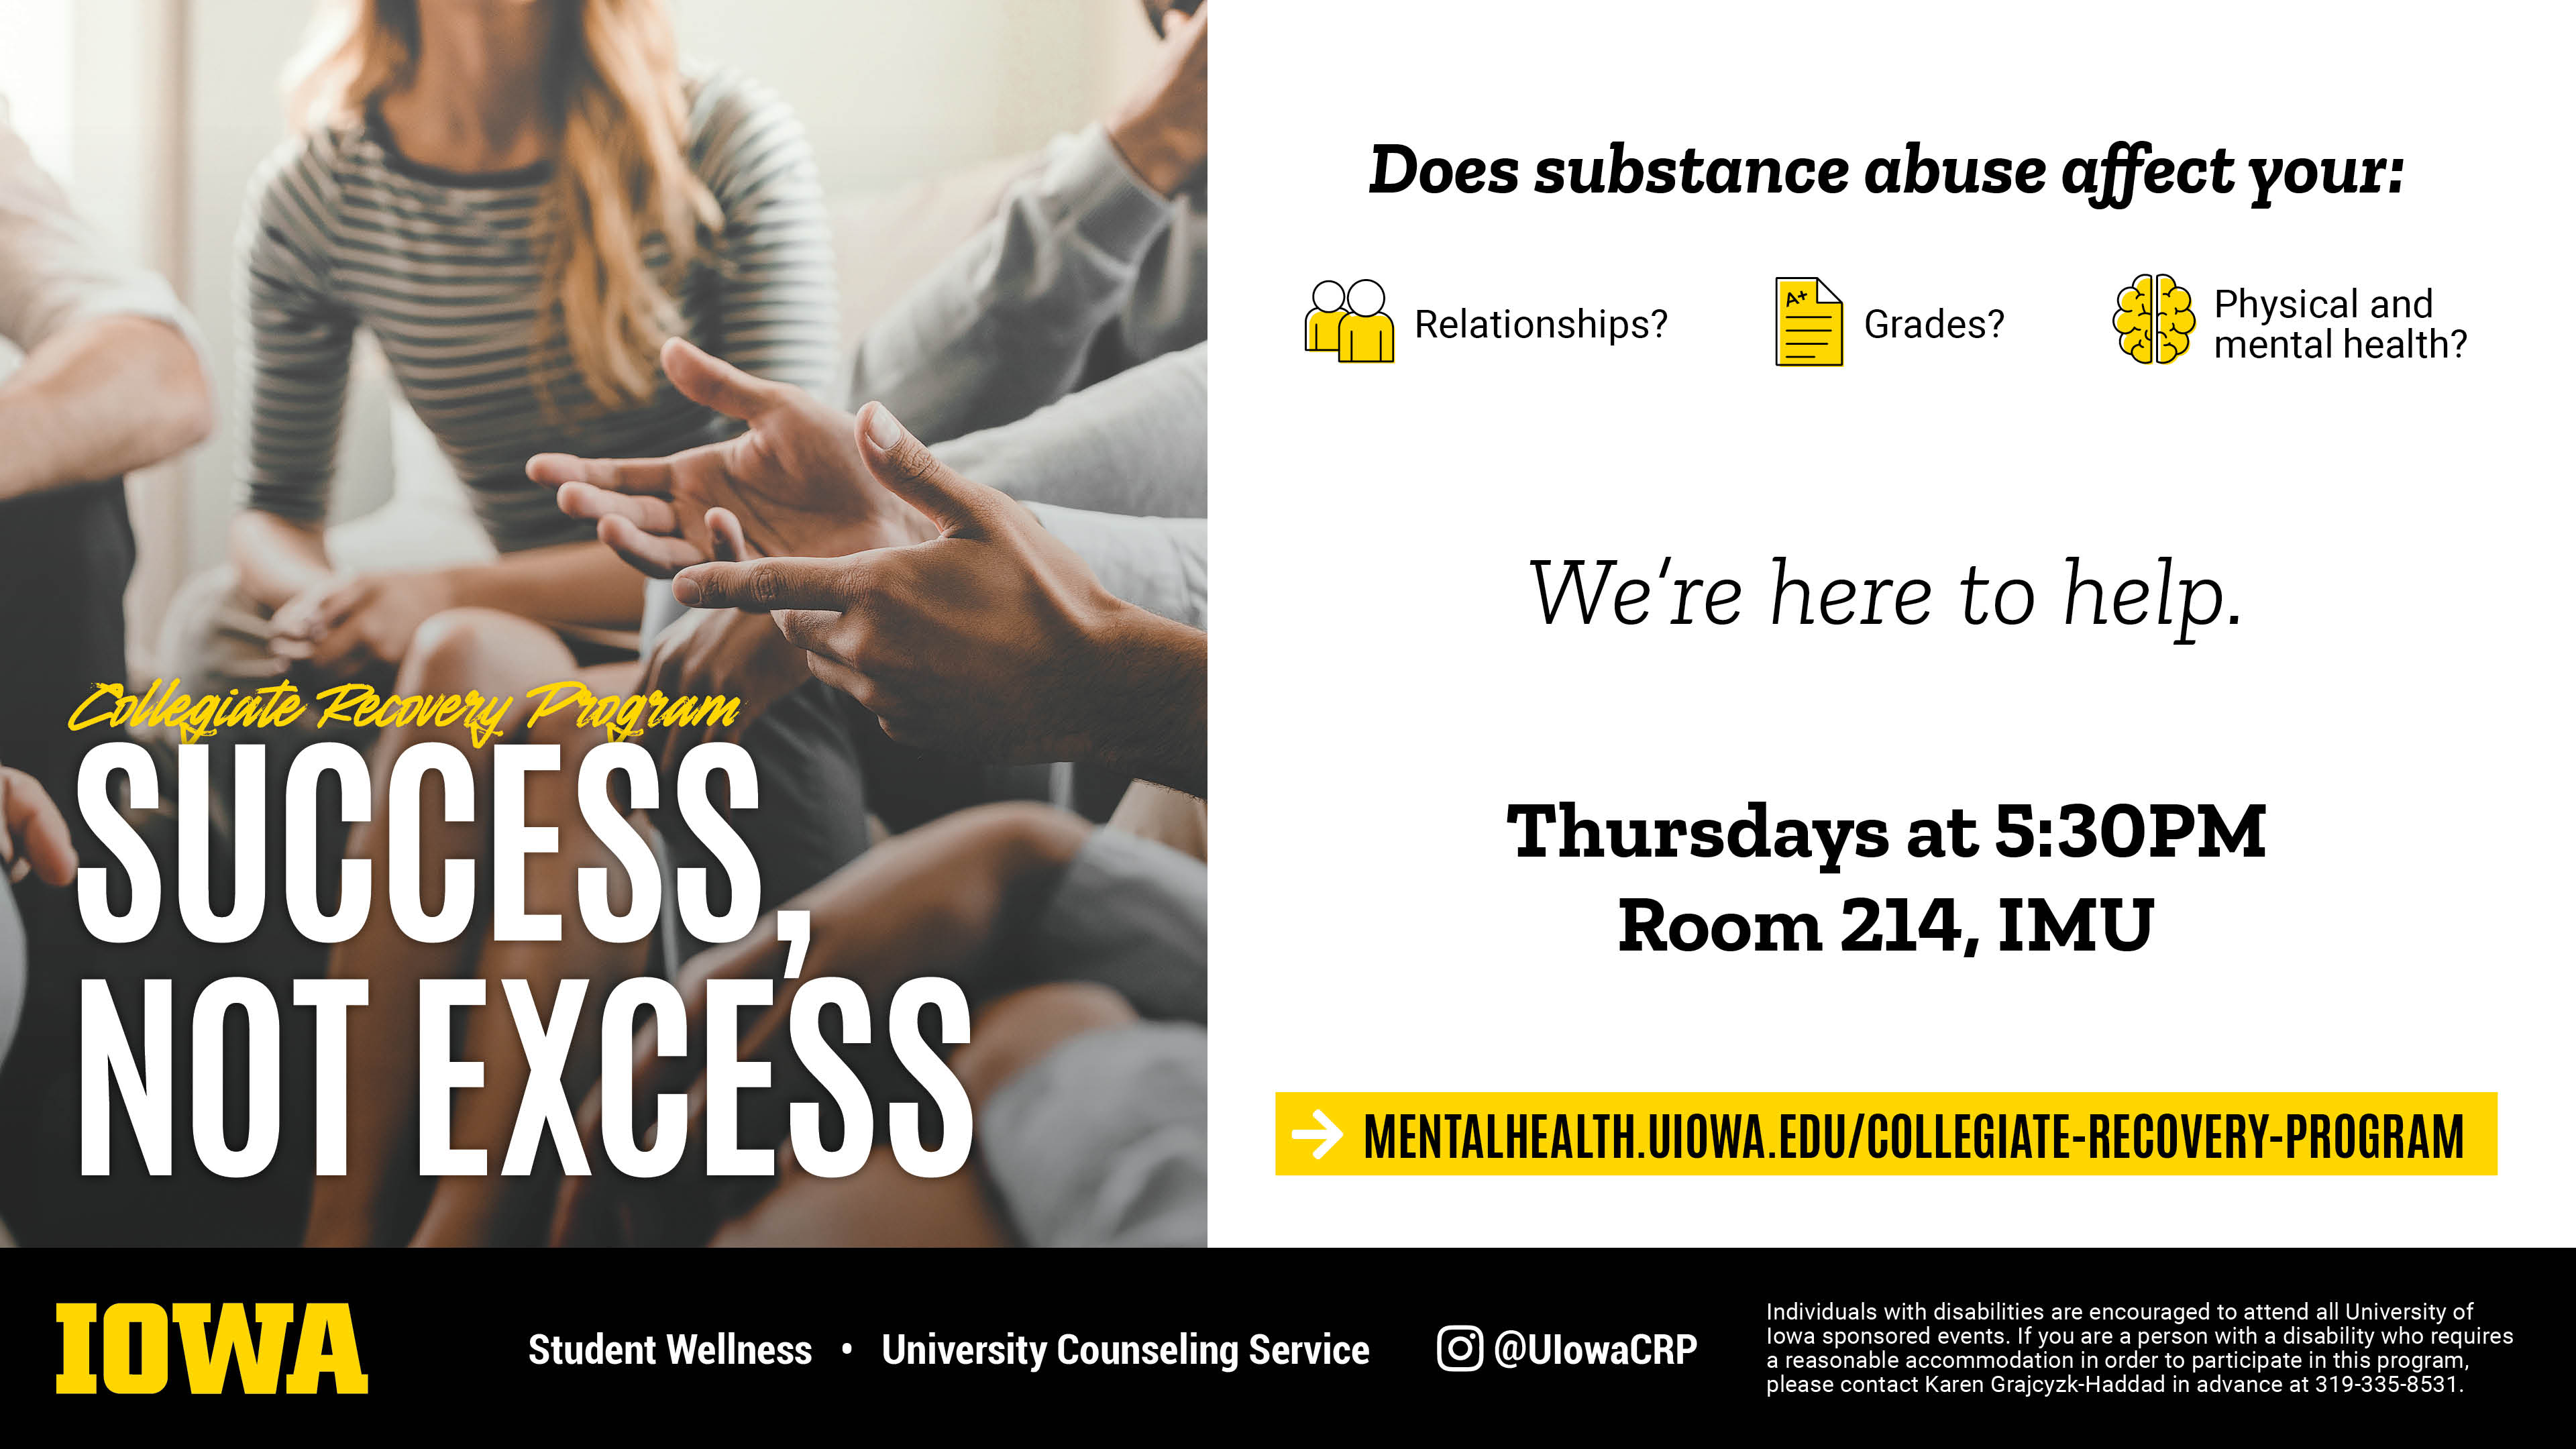 Success not Excess flyer that asks does substance abuse affect your relationships? Grades? or Physical and Mental Health? we are here to help Thursdays at 5:30 room 214, IMU